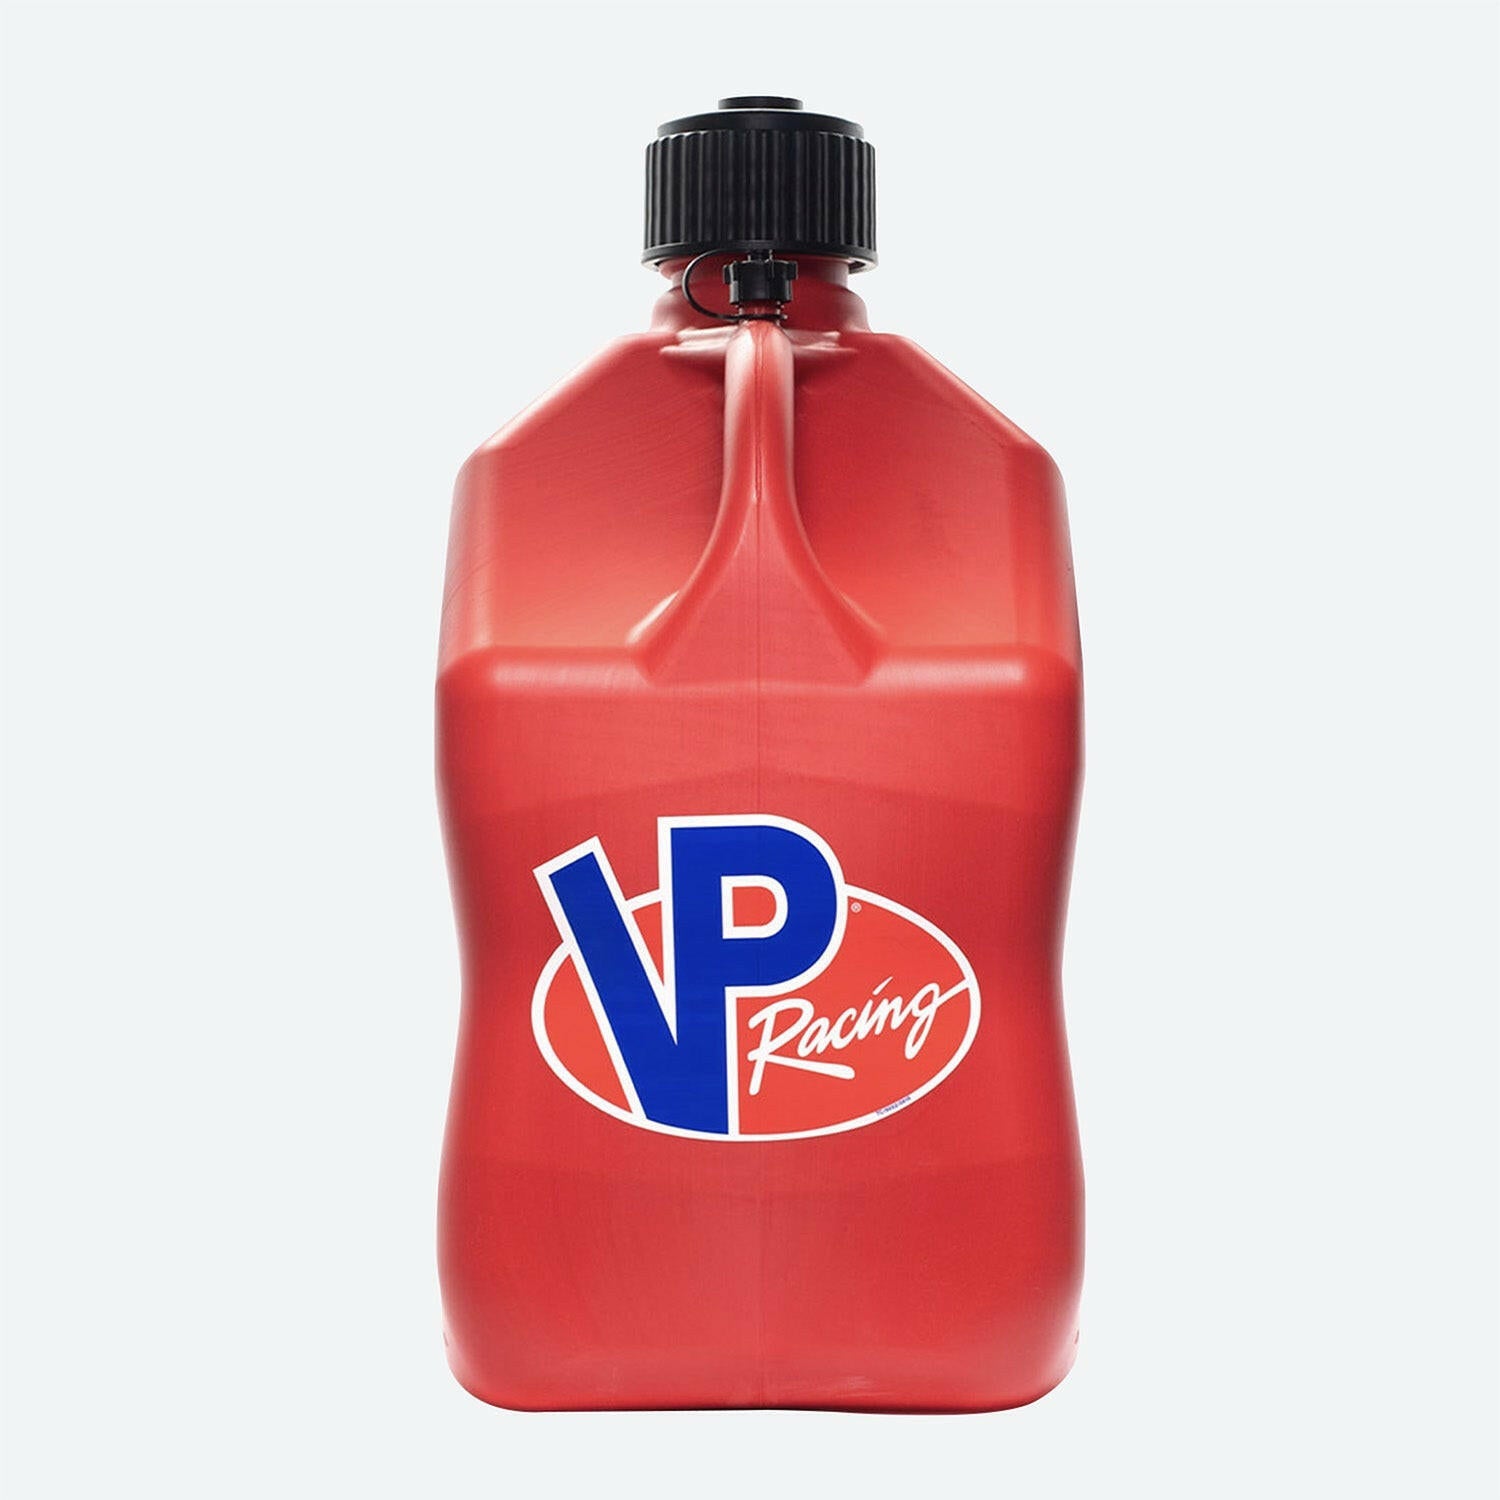 A red plastic 5.5-Gallon Motorsport Container® utility jug - Square with a black screw cap and a spout, featuring the blue and red VP Racing logo on the front.